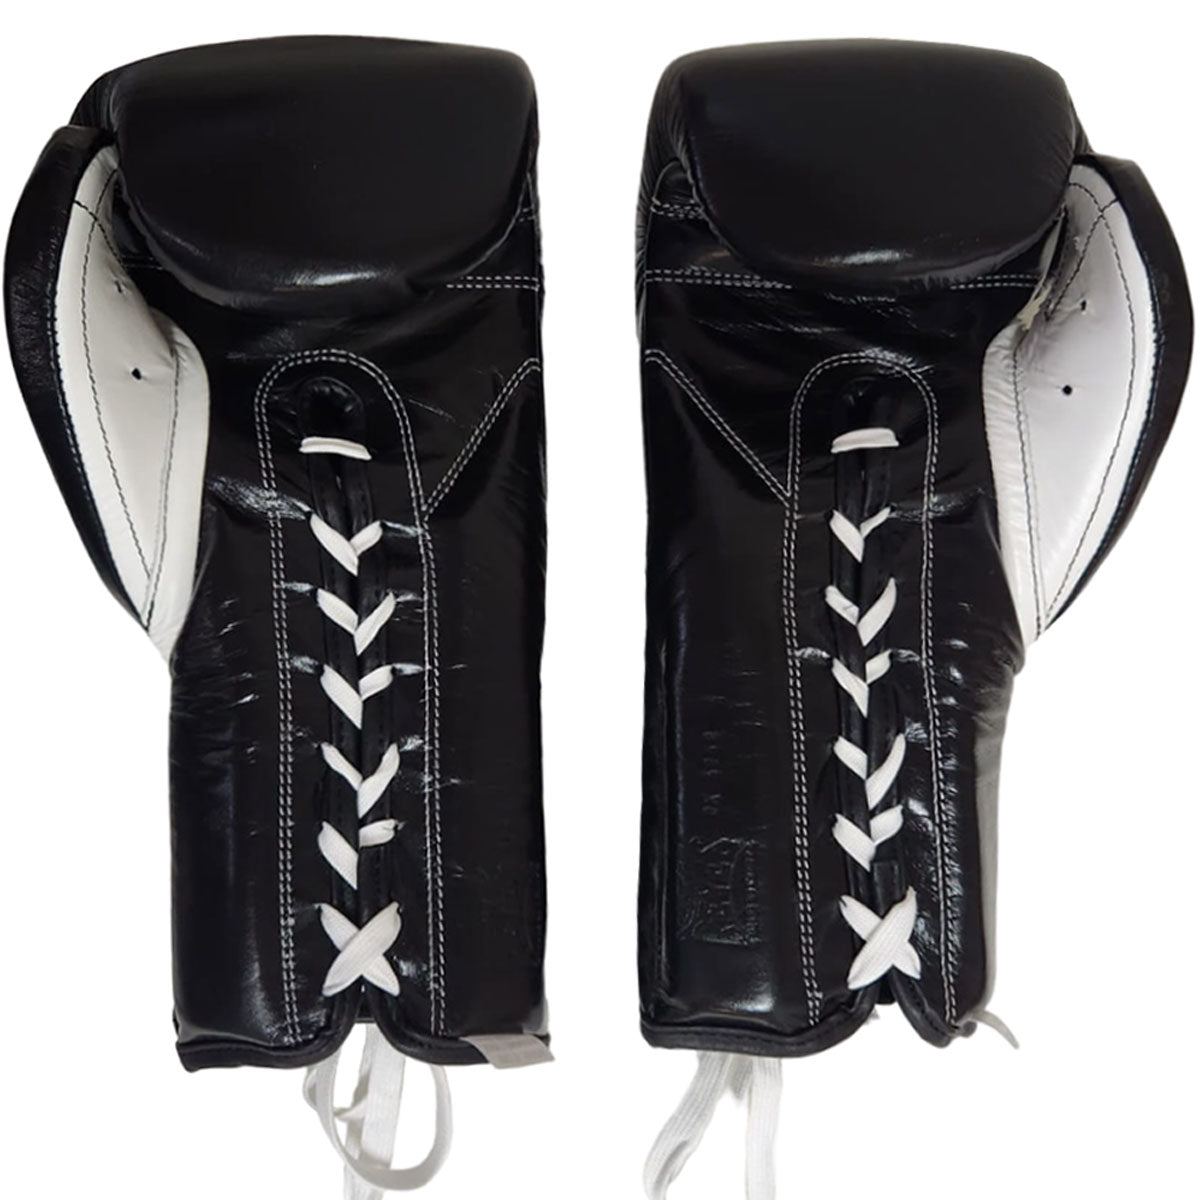 Boxing Gloves Cleto Reyes Traditional lace-up Black (Free Shipping)